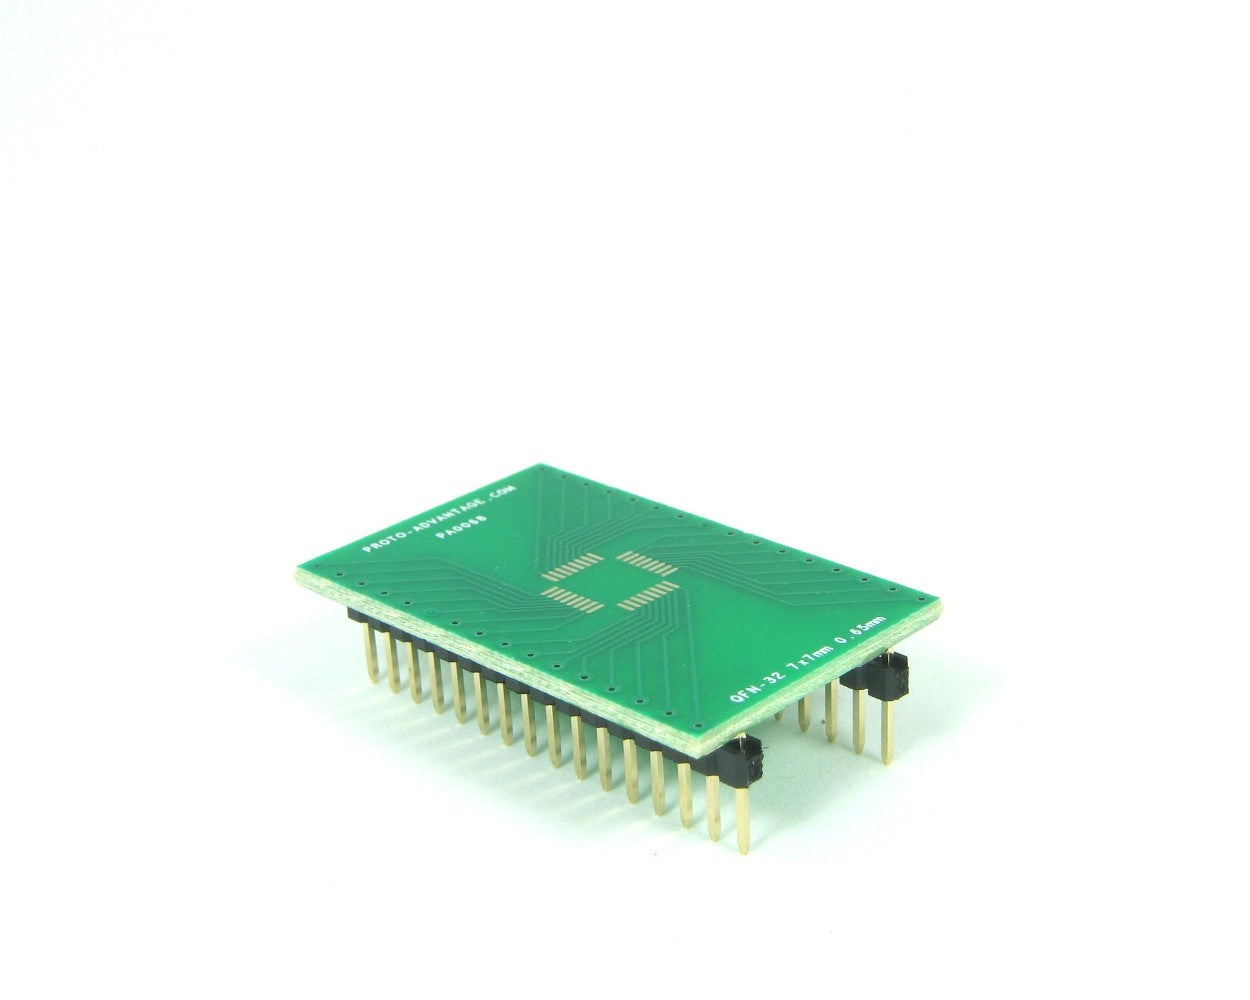 QFN-32 to DIP-32 SMT Adapter (0.65 mm pitch, 7 x 7 mm body)